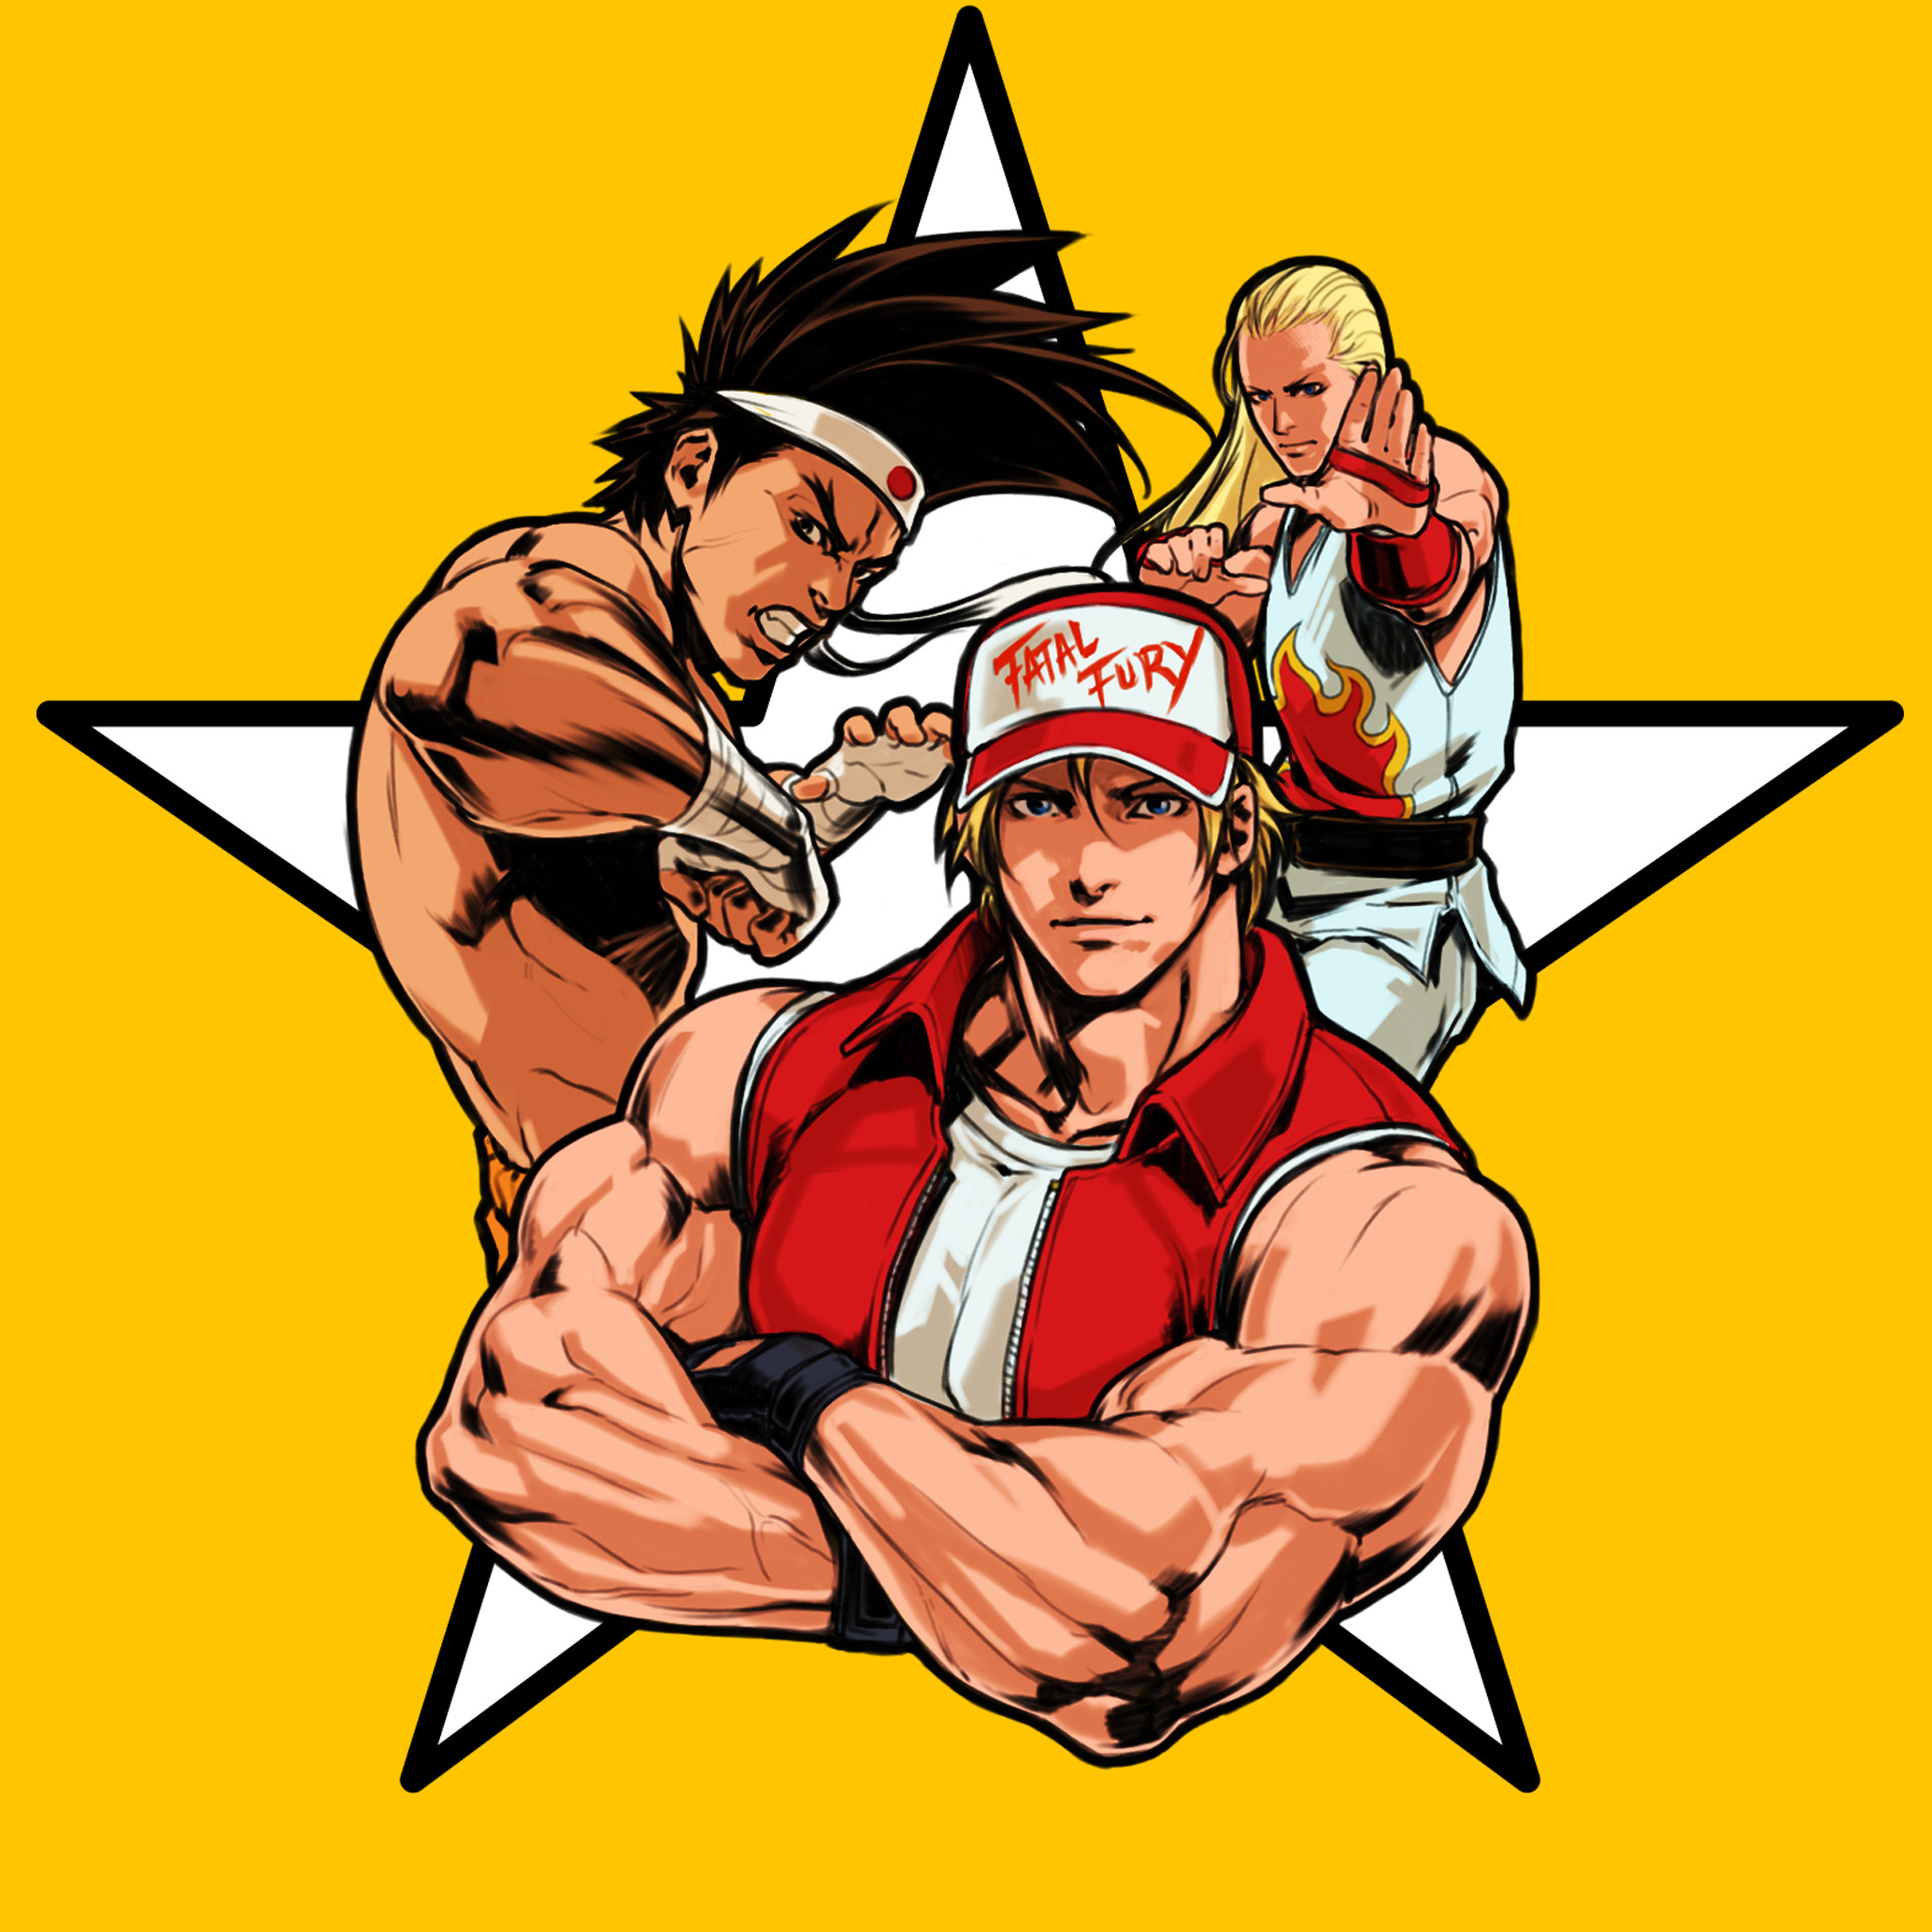 Street Fighter X Fatal Fury~Ryu Bio and quotes by JohnnyOTGS on DeviantArt